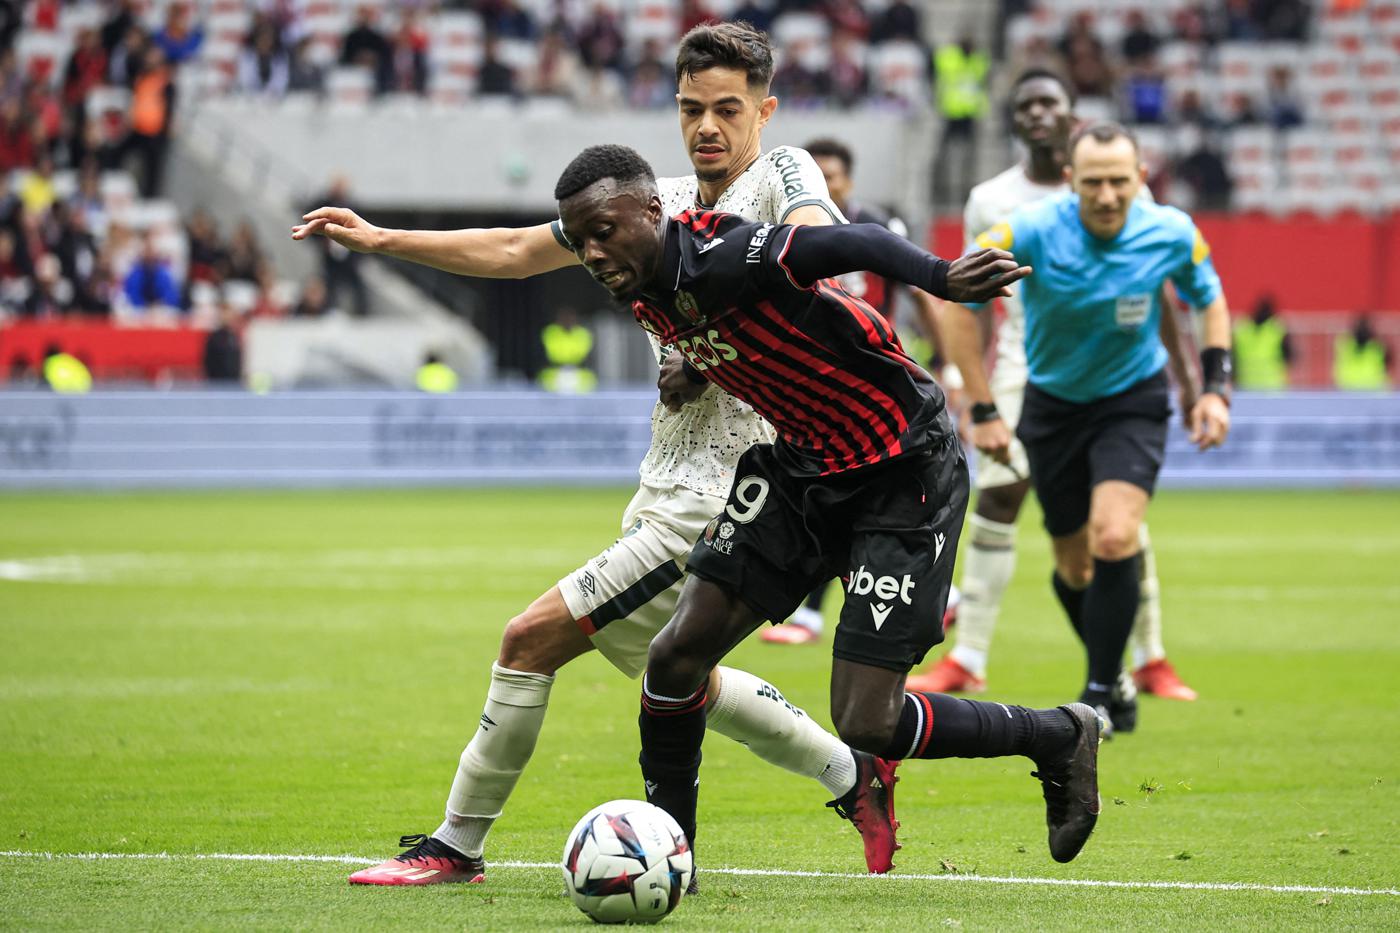 Nice v Lorient - 1:1. French Championship, round 28. Match review, statistics.